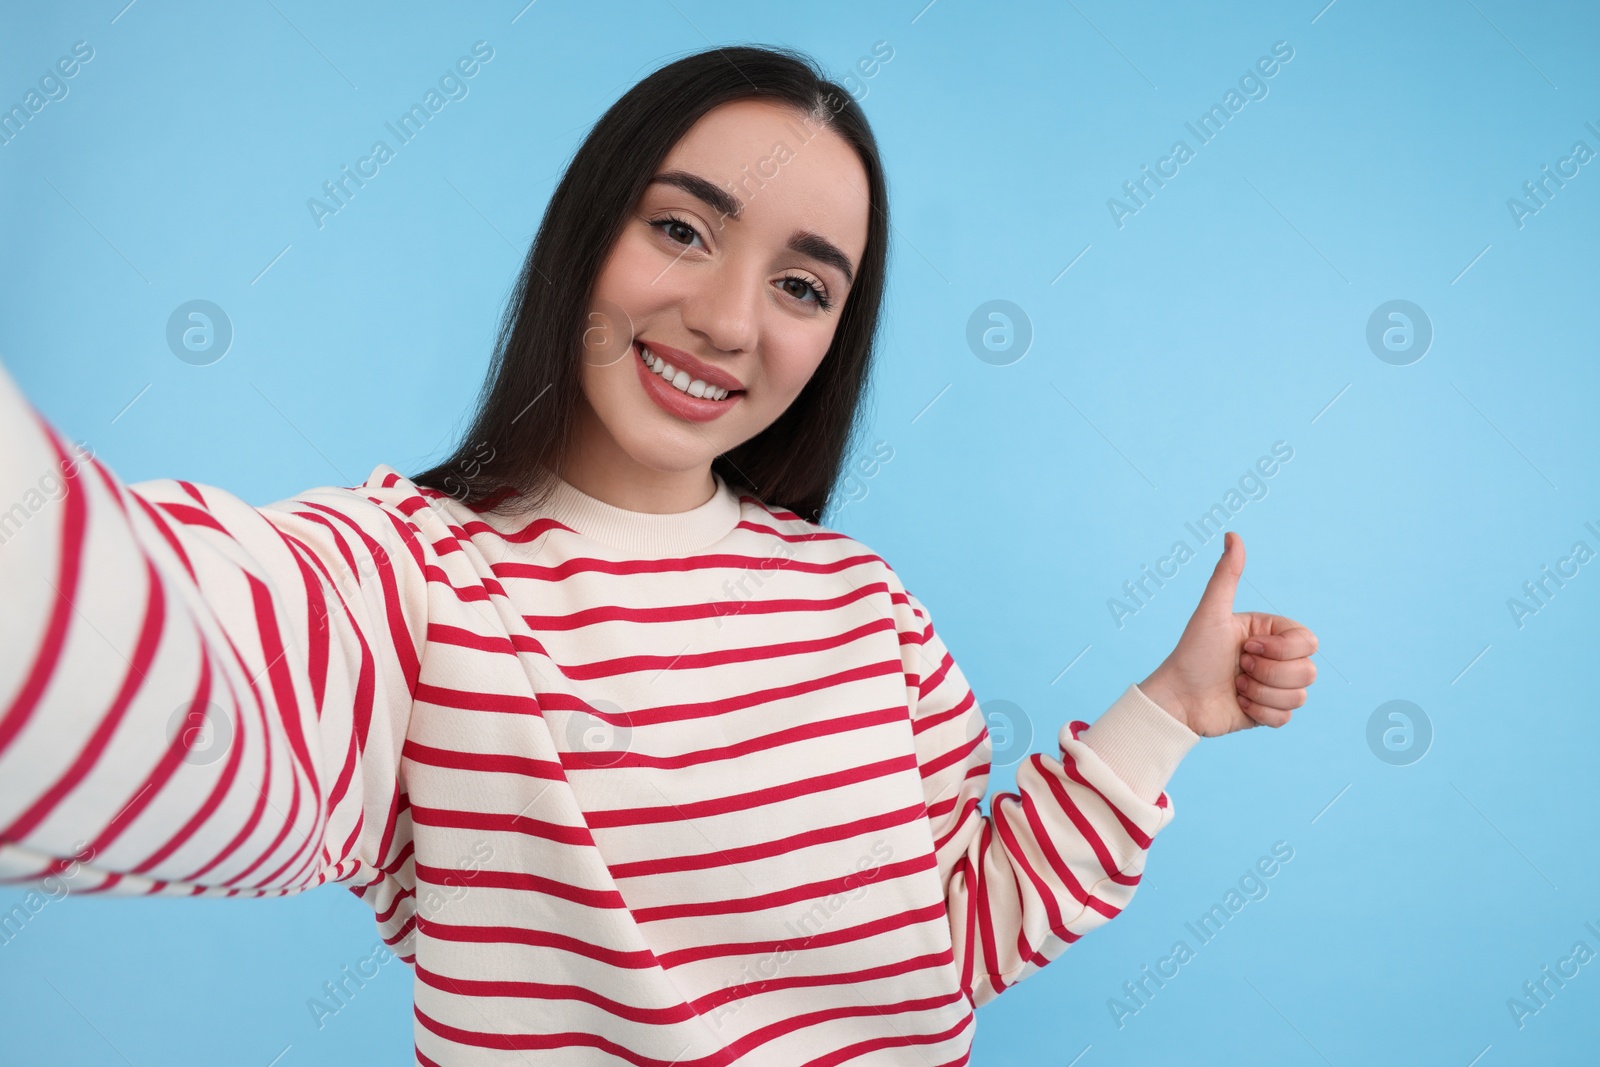 Photo of Smiling young woman taking selfie and showing thumbs up on light blue background